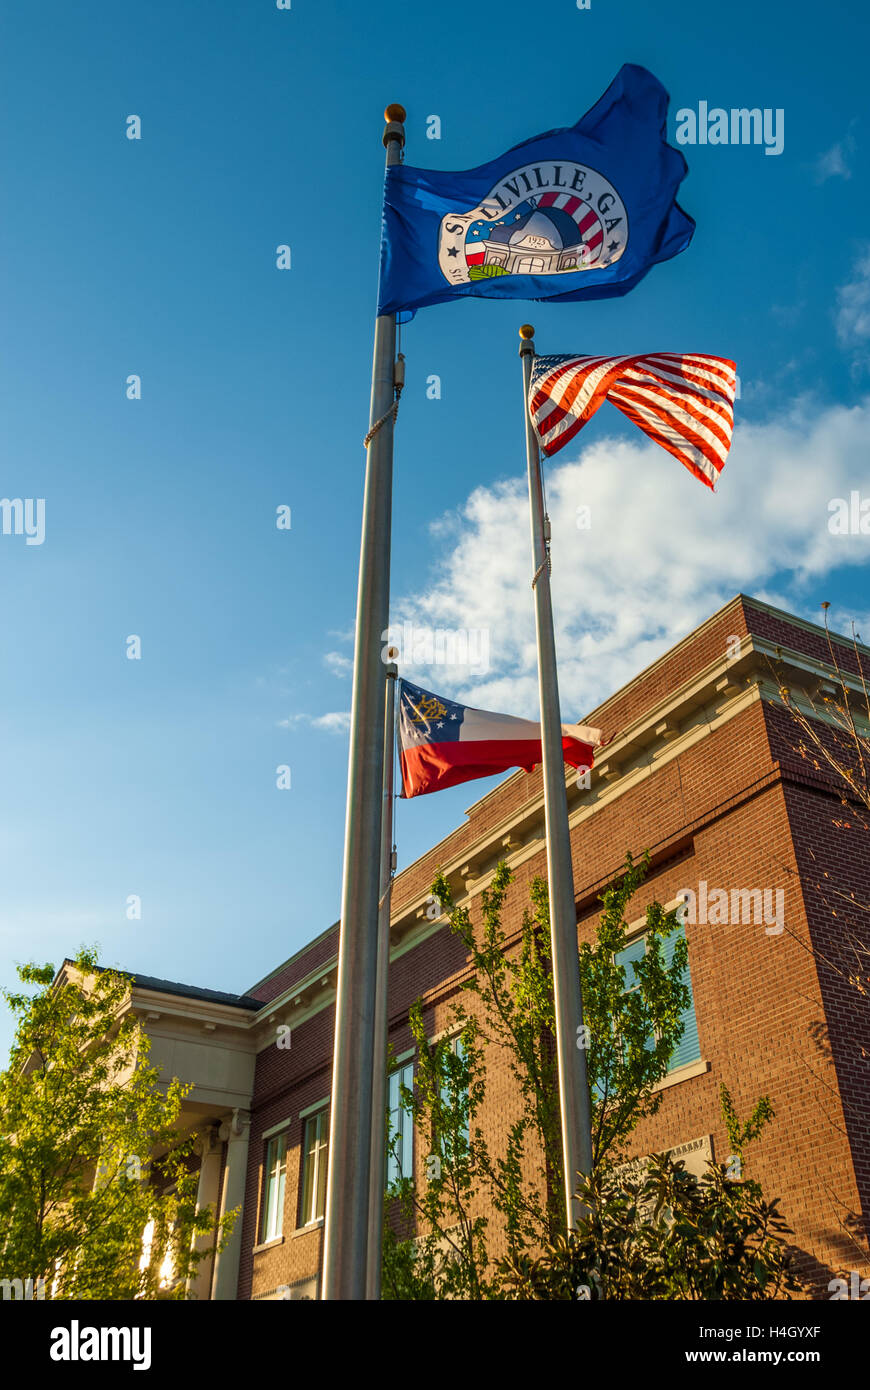 US, Georgia, and Snellville city flags unfurled in the wind at sunset in front of the City Hall building in Snellville, Georgia. Stock Photo